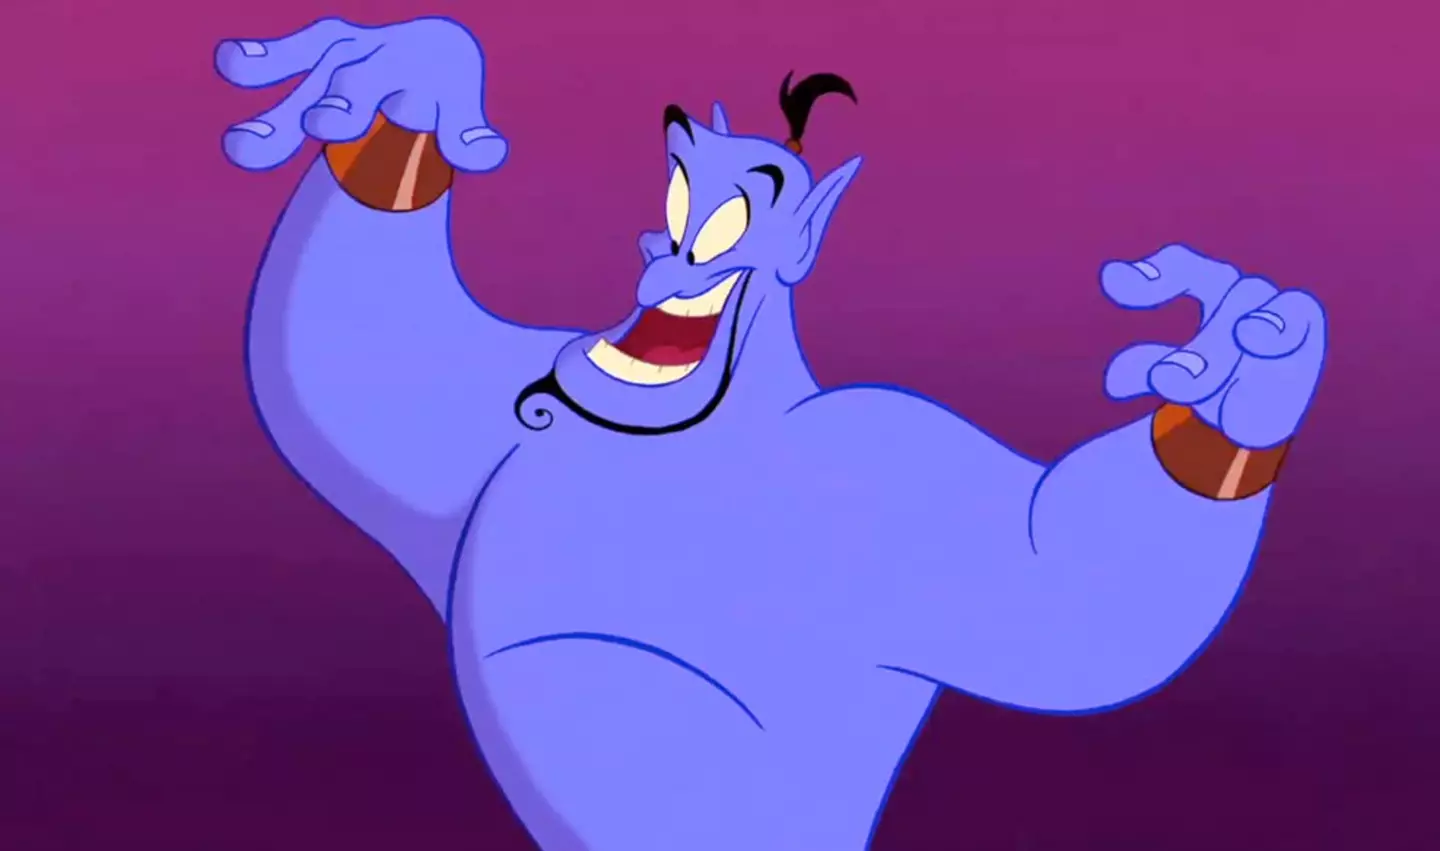 Robin Williams was only paid $75,000 instead of $8 million for his role as Genie in Aladdin.